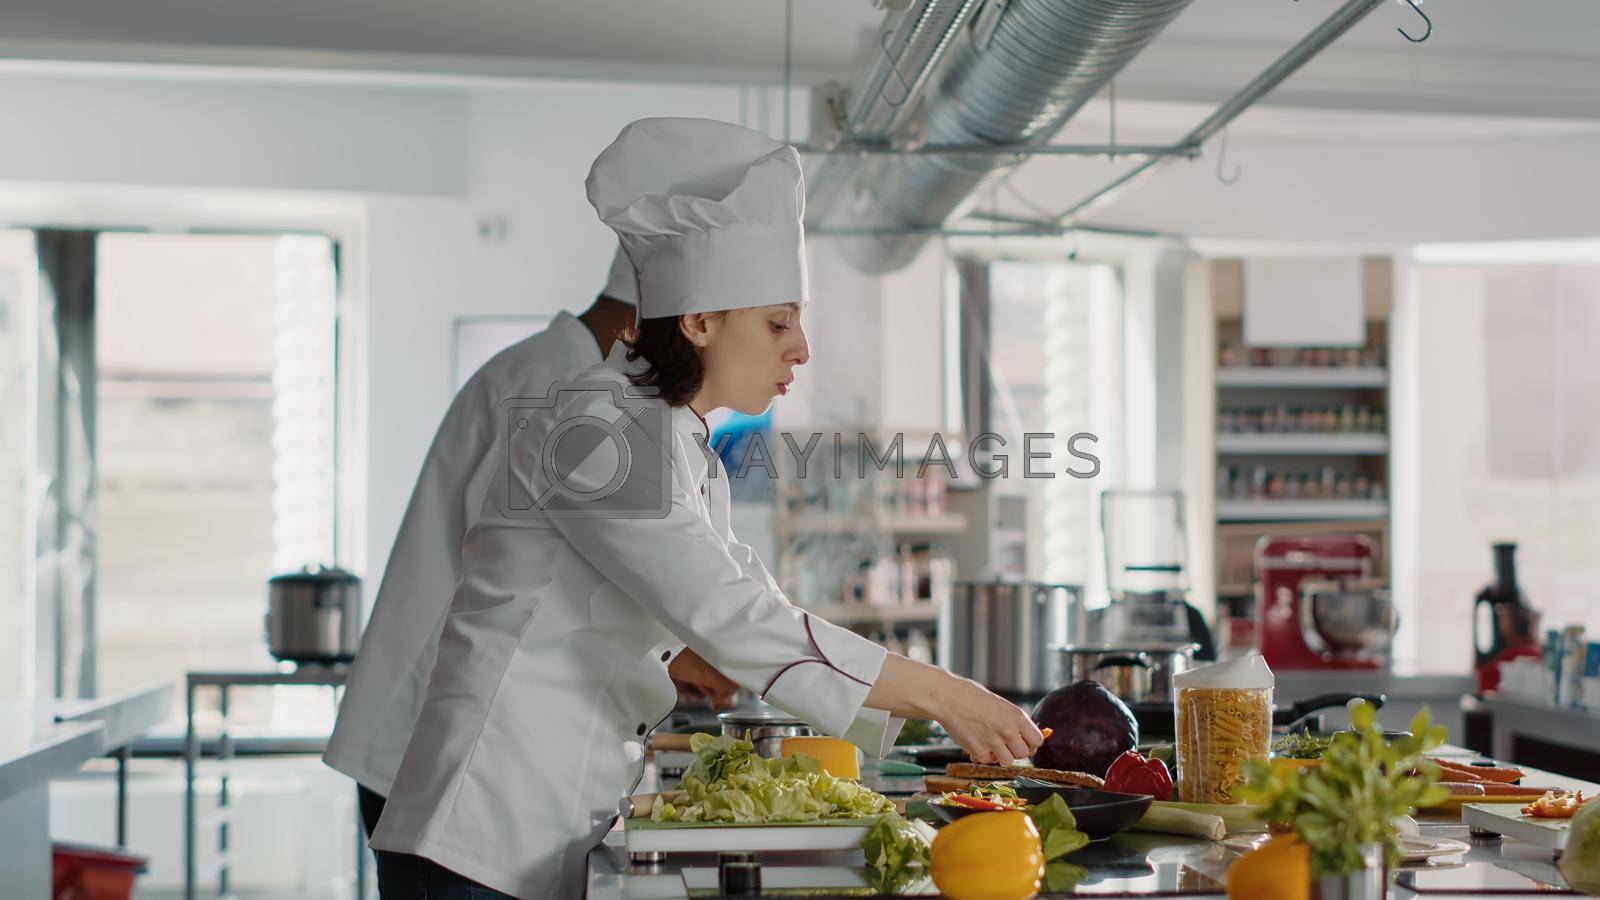 Woman cooking authentic professional cuisine food recipe in kitchen, using utensils and organic ingredients. Female chef preparing gourmet meal dish for gastronomy and professional menu.